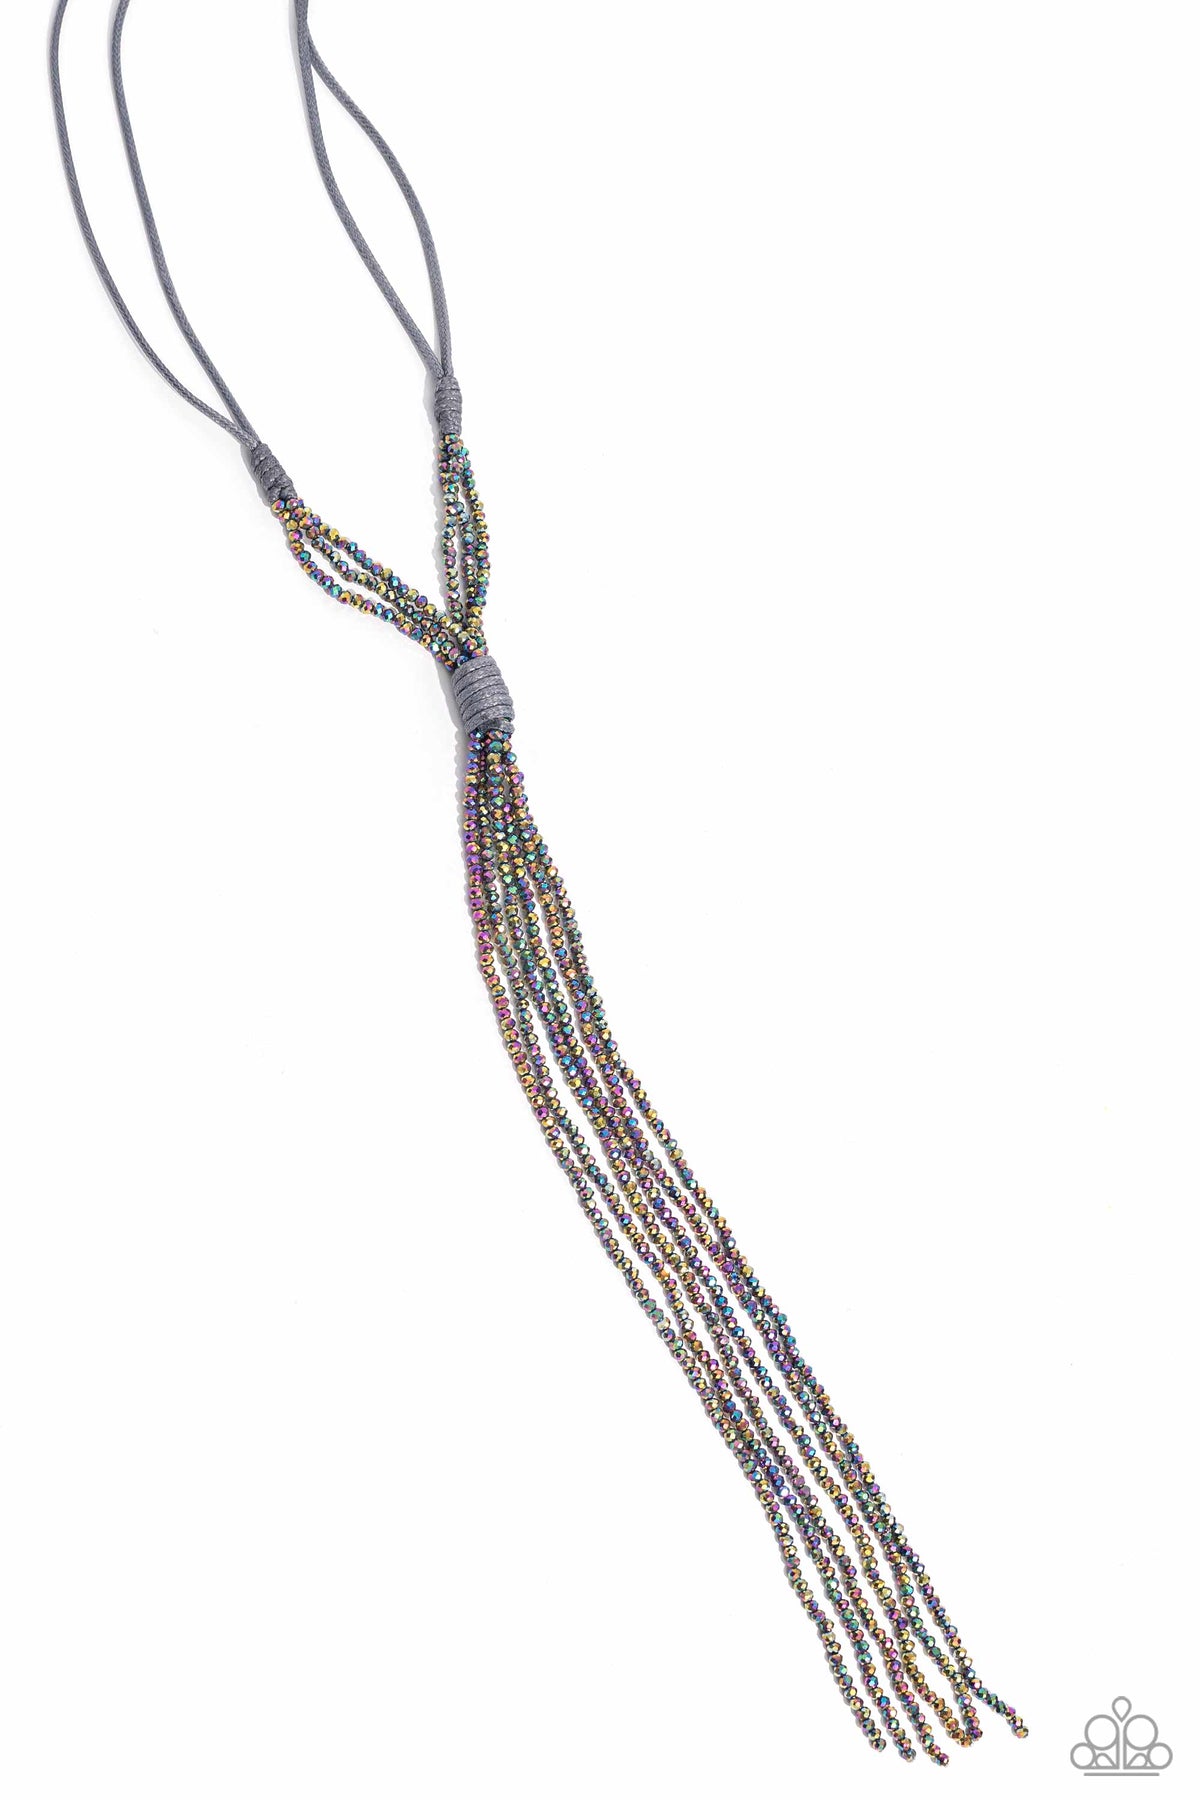 Knotted Karma Silver &amp; Oil Spill Tassel Necklace - Paparazzi Accessories- lightbox - CarasShop.com - $5 Jewelry by Cara Jewels